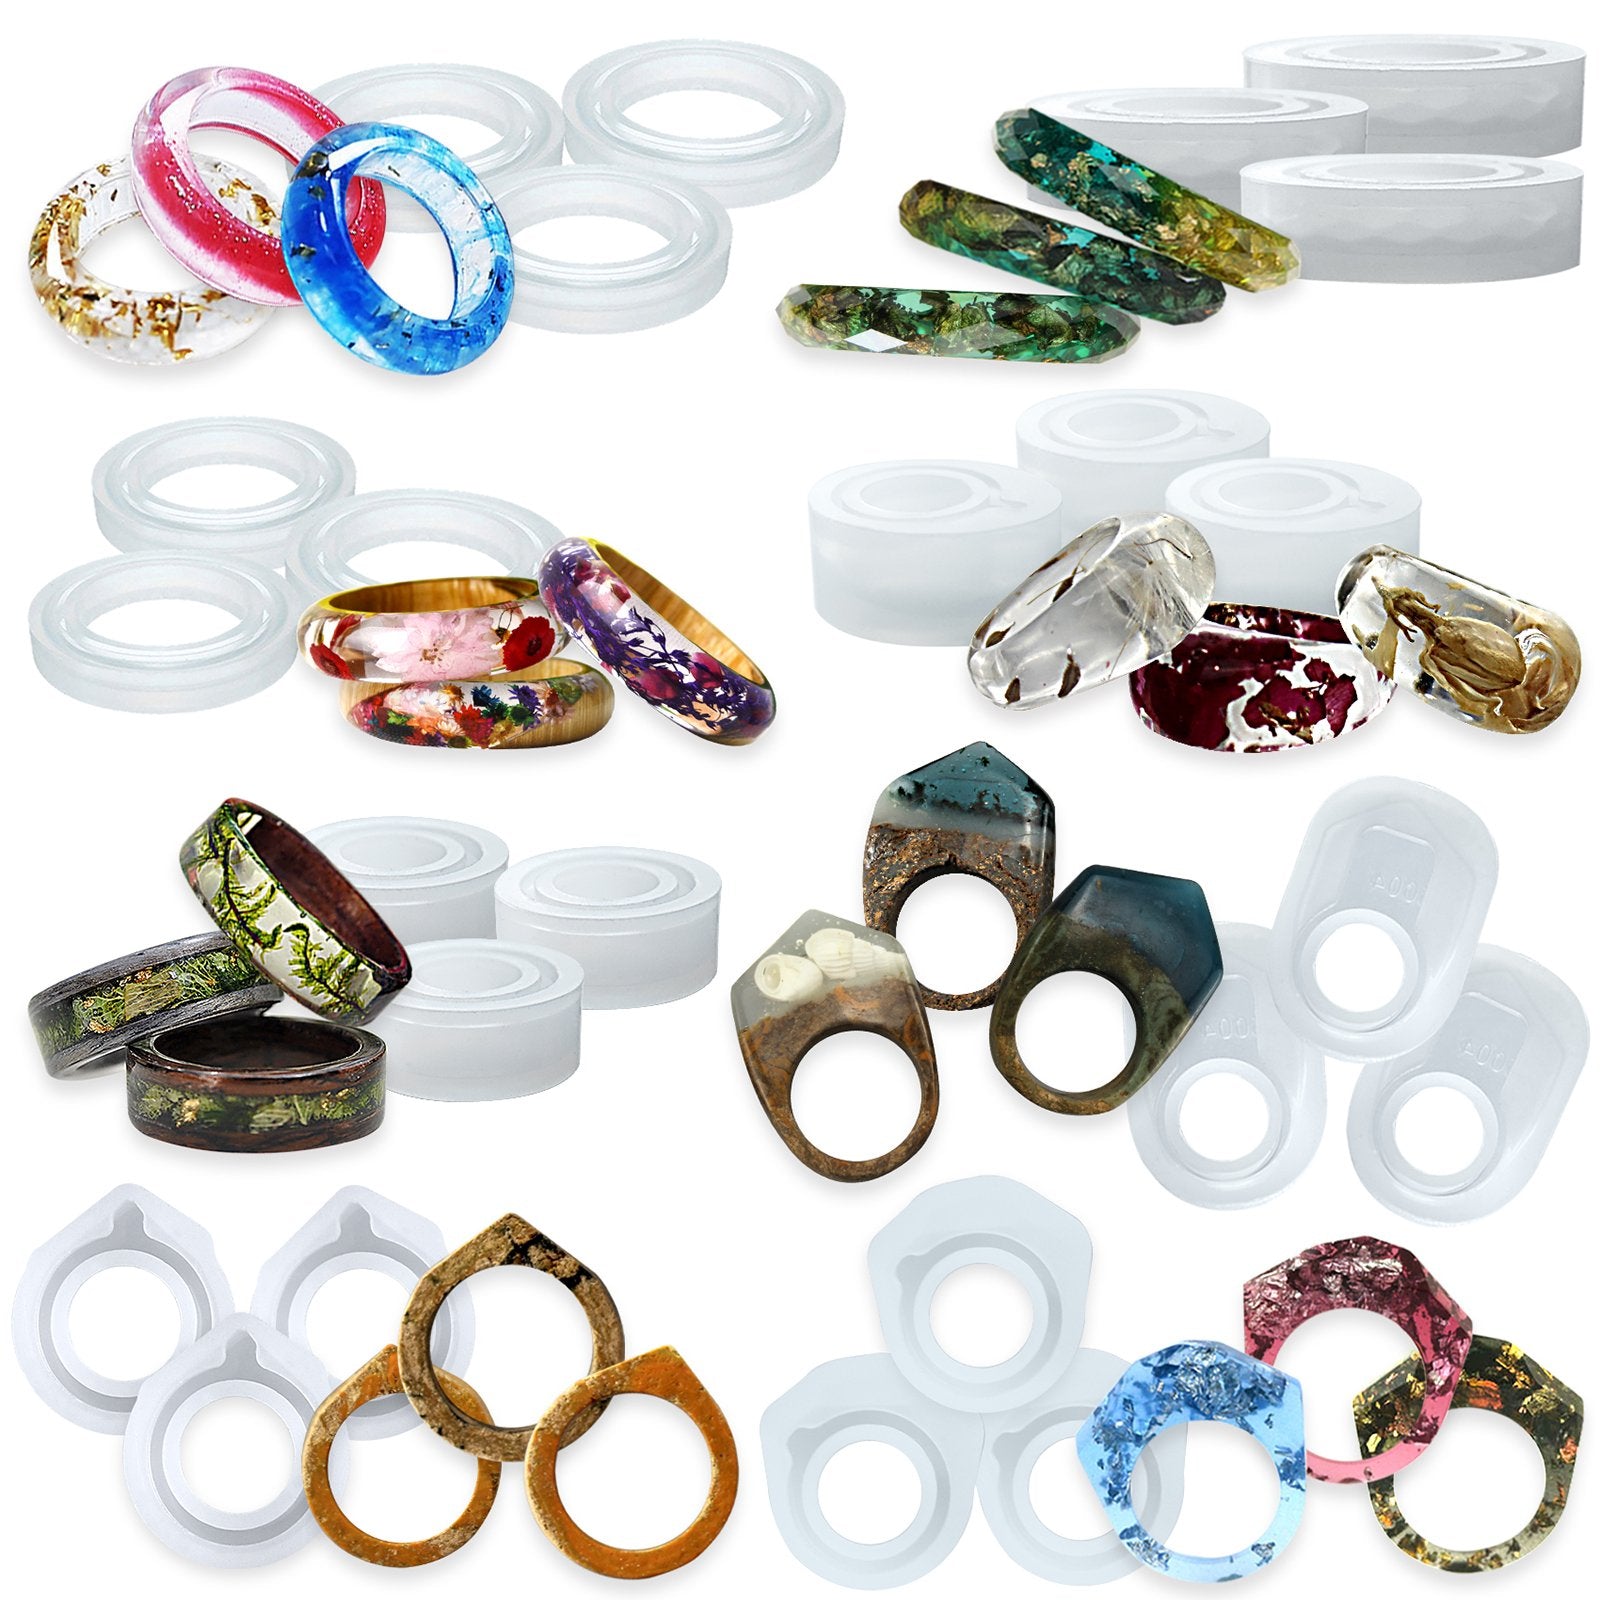 DIY Chunky Rings and Plastic Jewelry with Moldable Plastic - Party